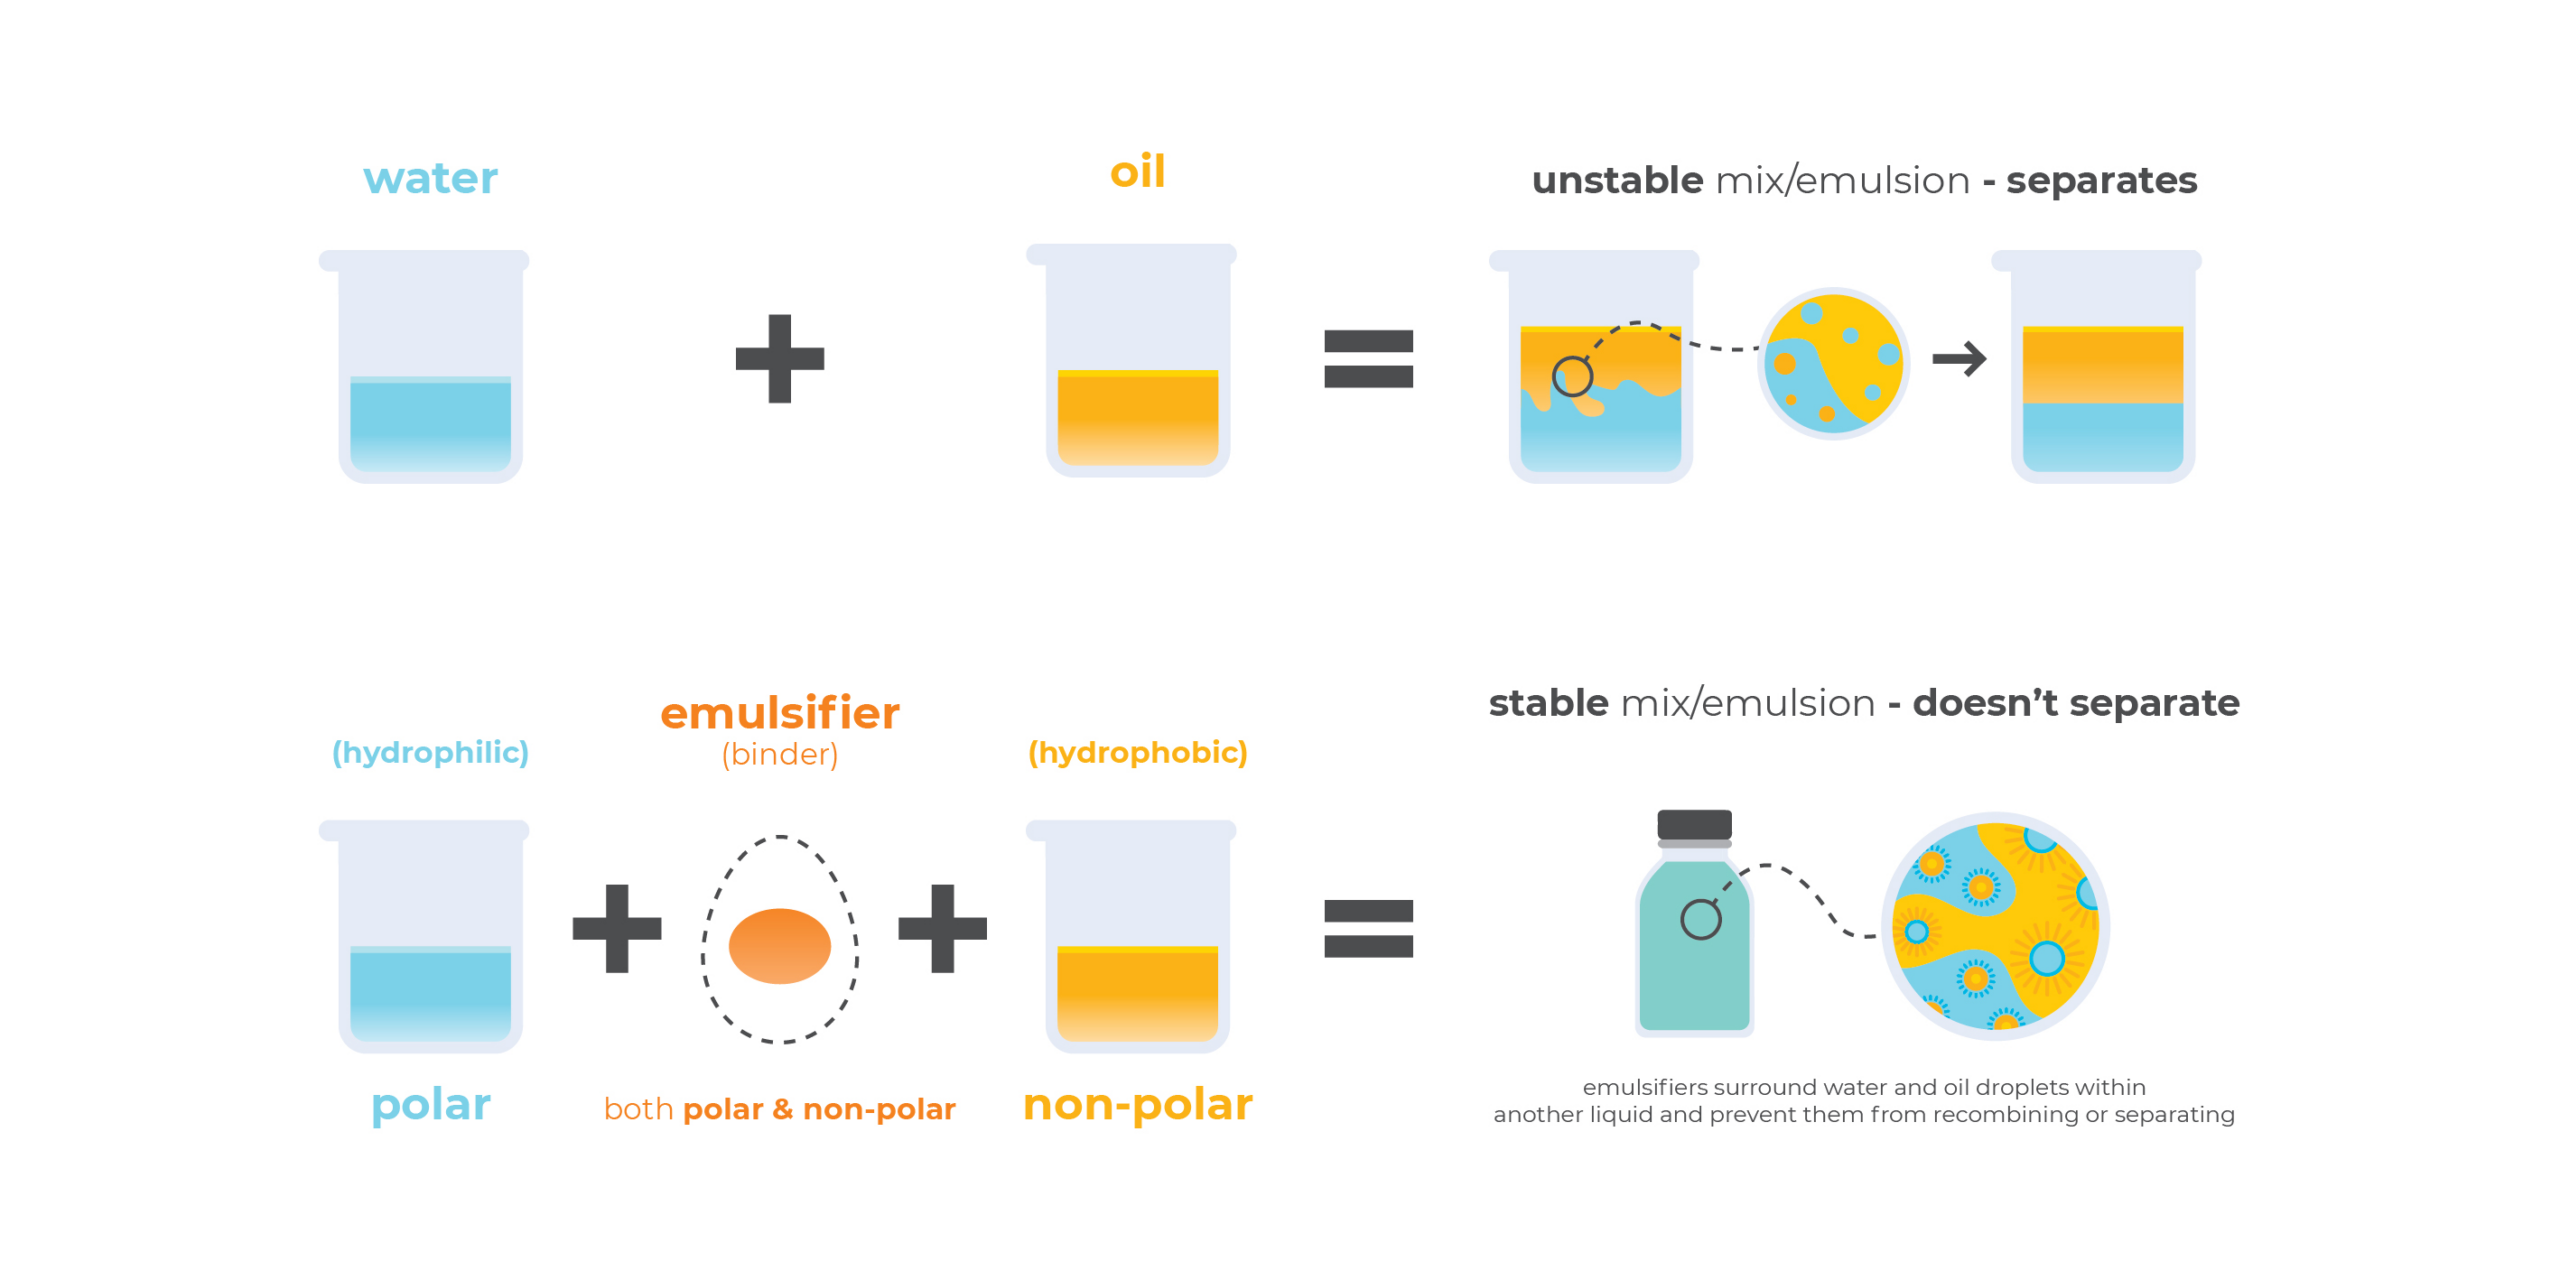 What Are Emulsifiers and How Safe Are They for Consumption? - Musim Mas